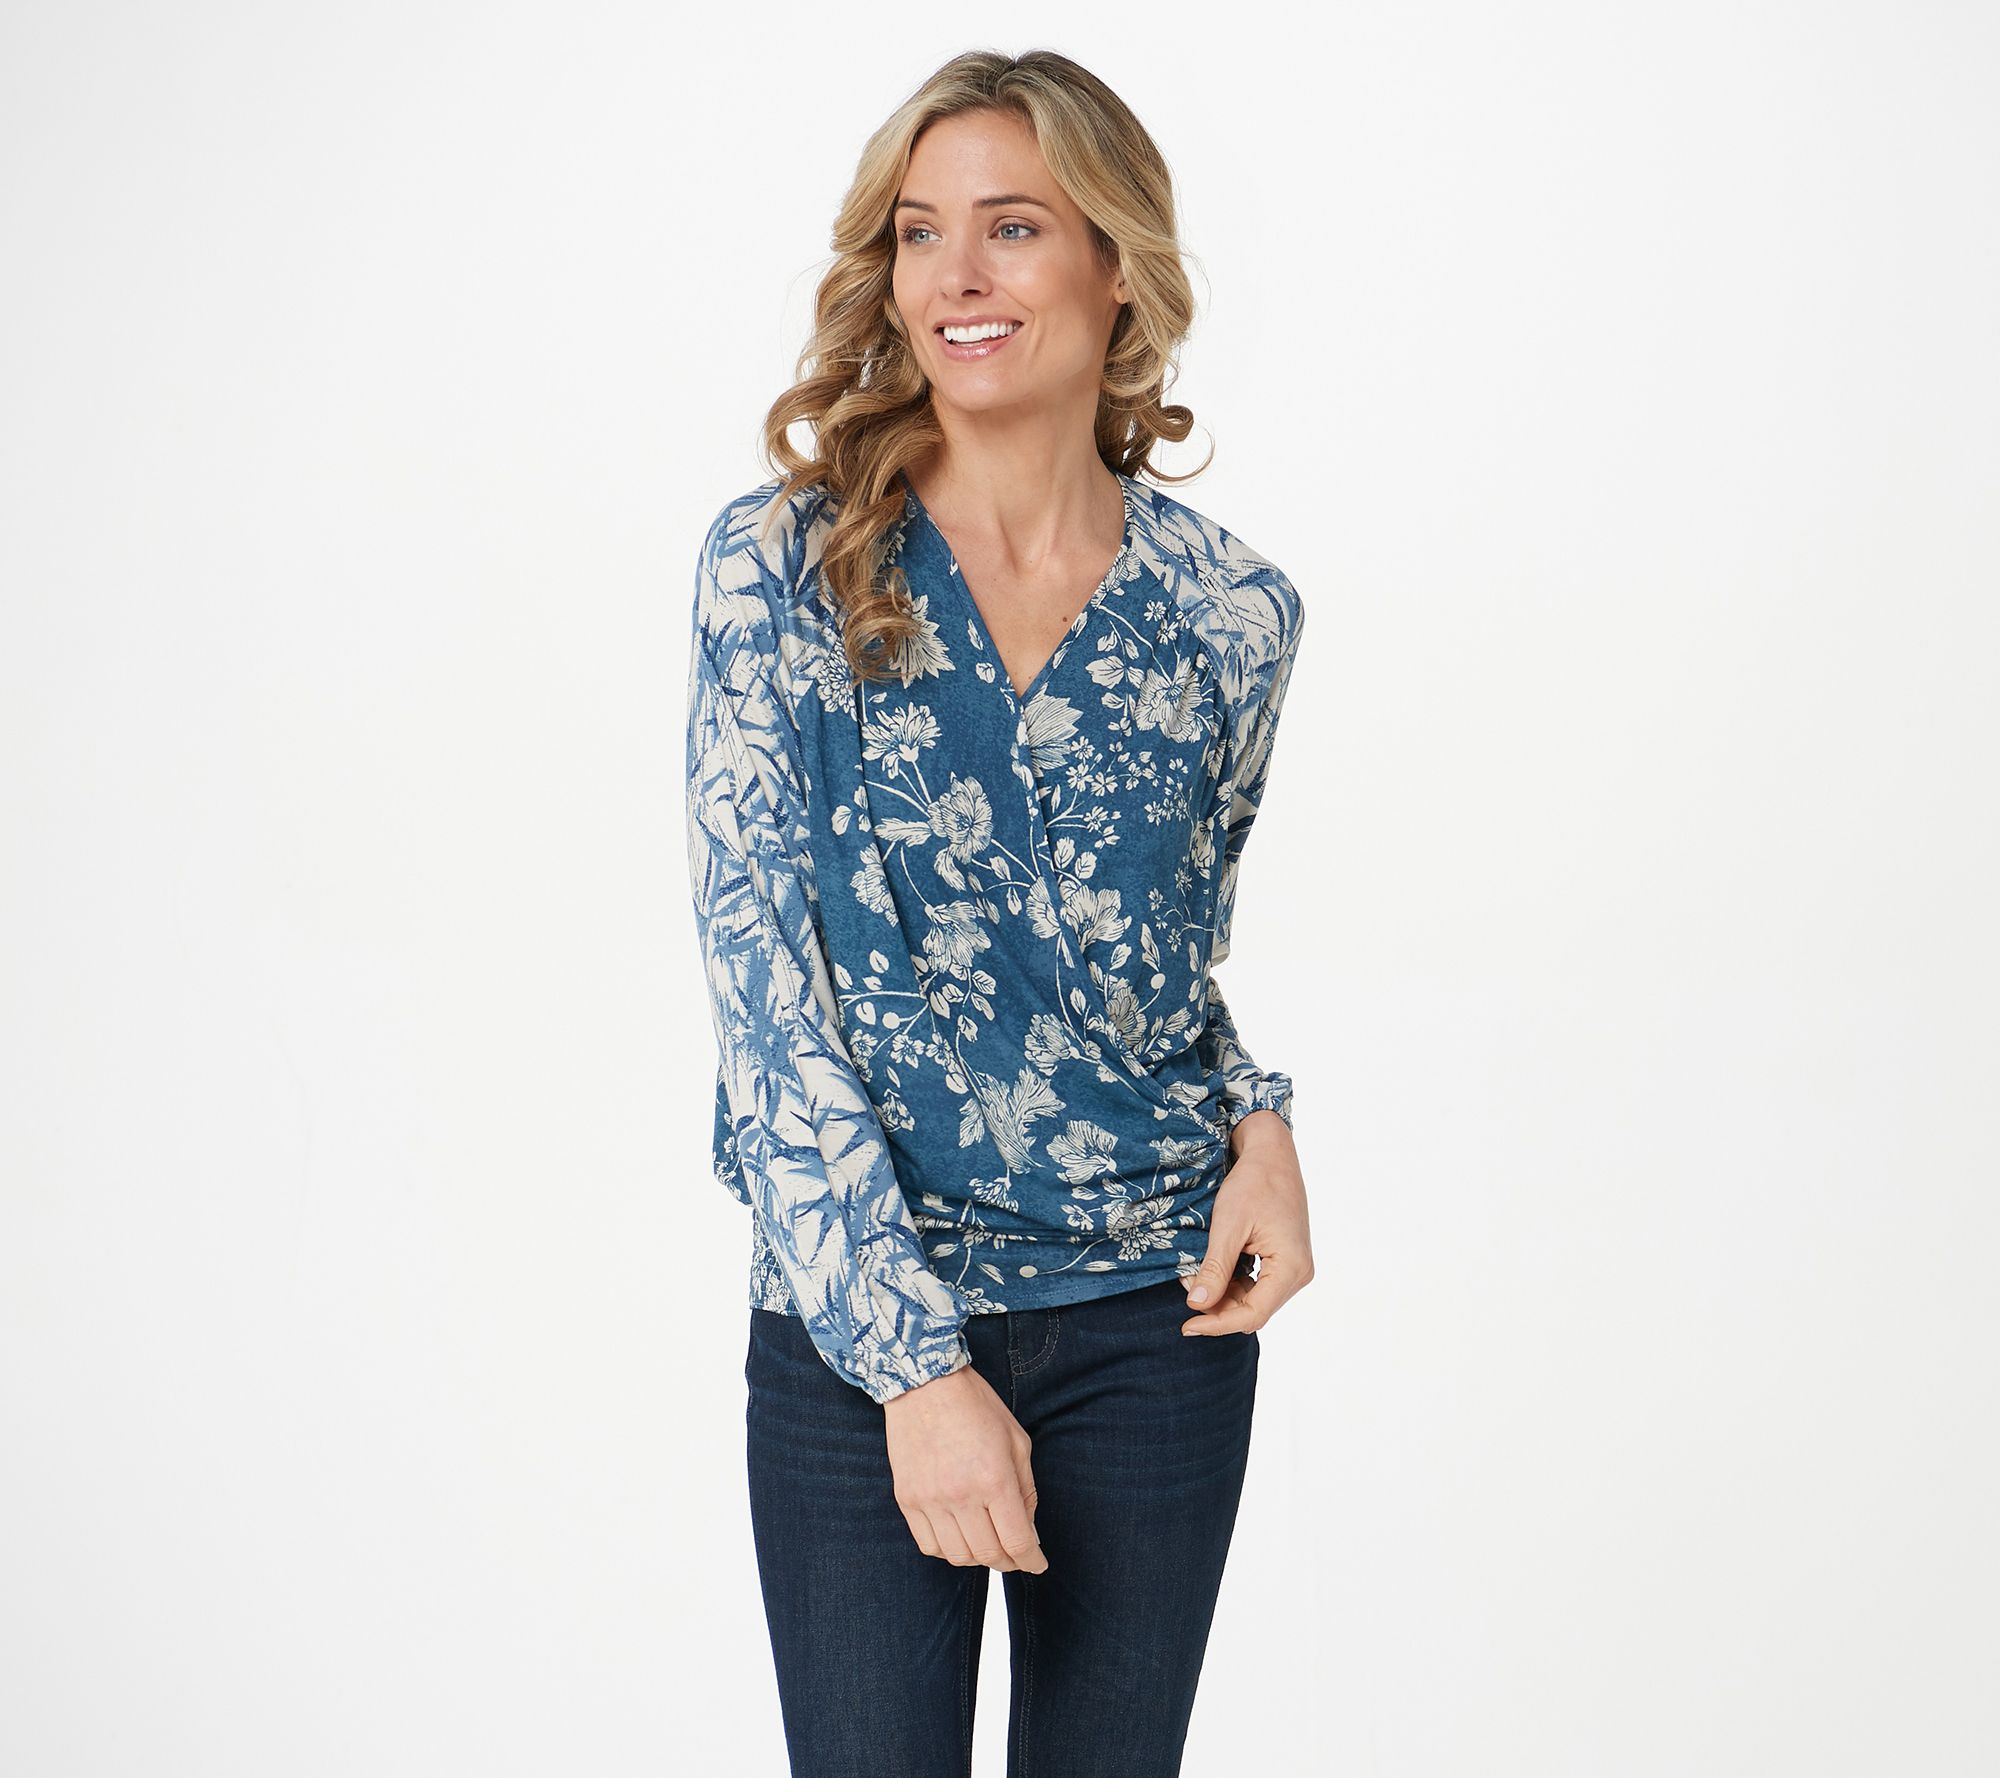 The Muses Closet Yummy Knit Printed Floral Long-Sleeve Top - QVC.com